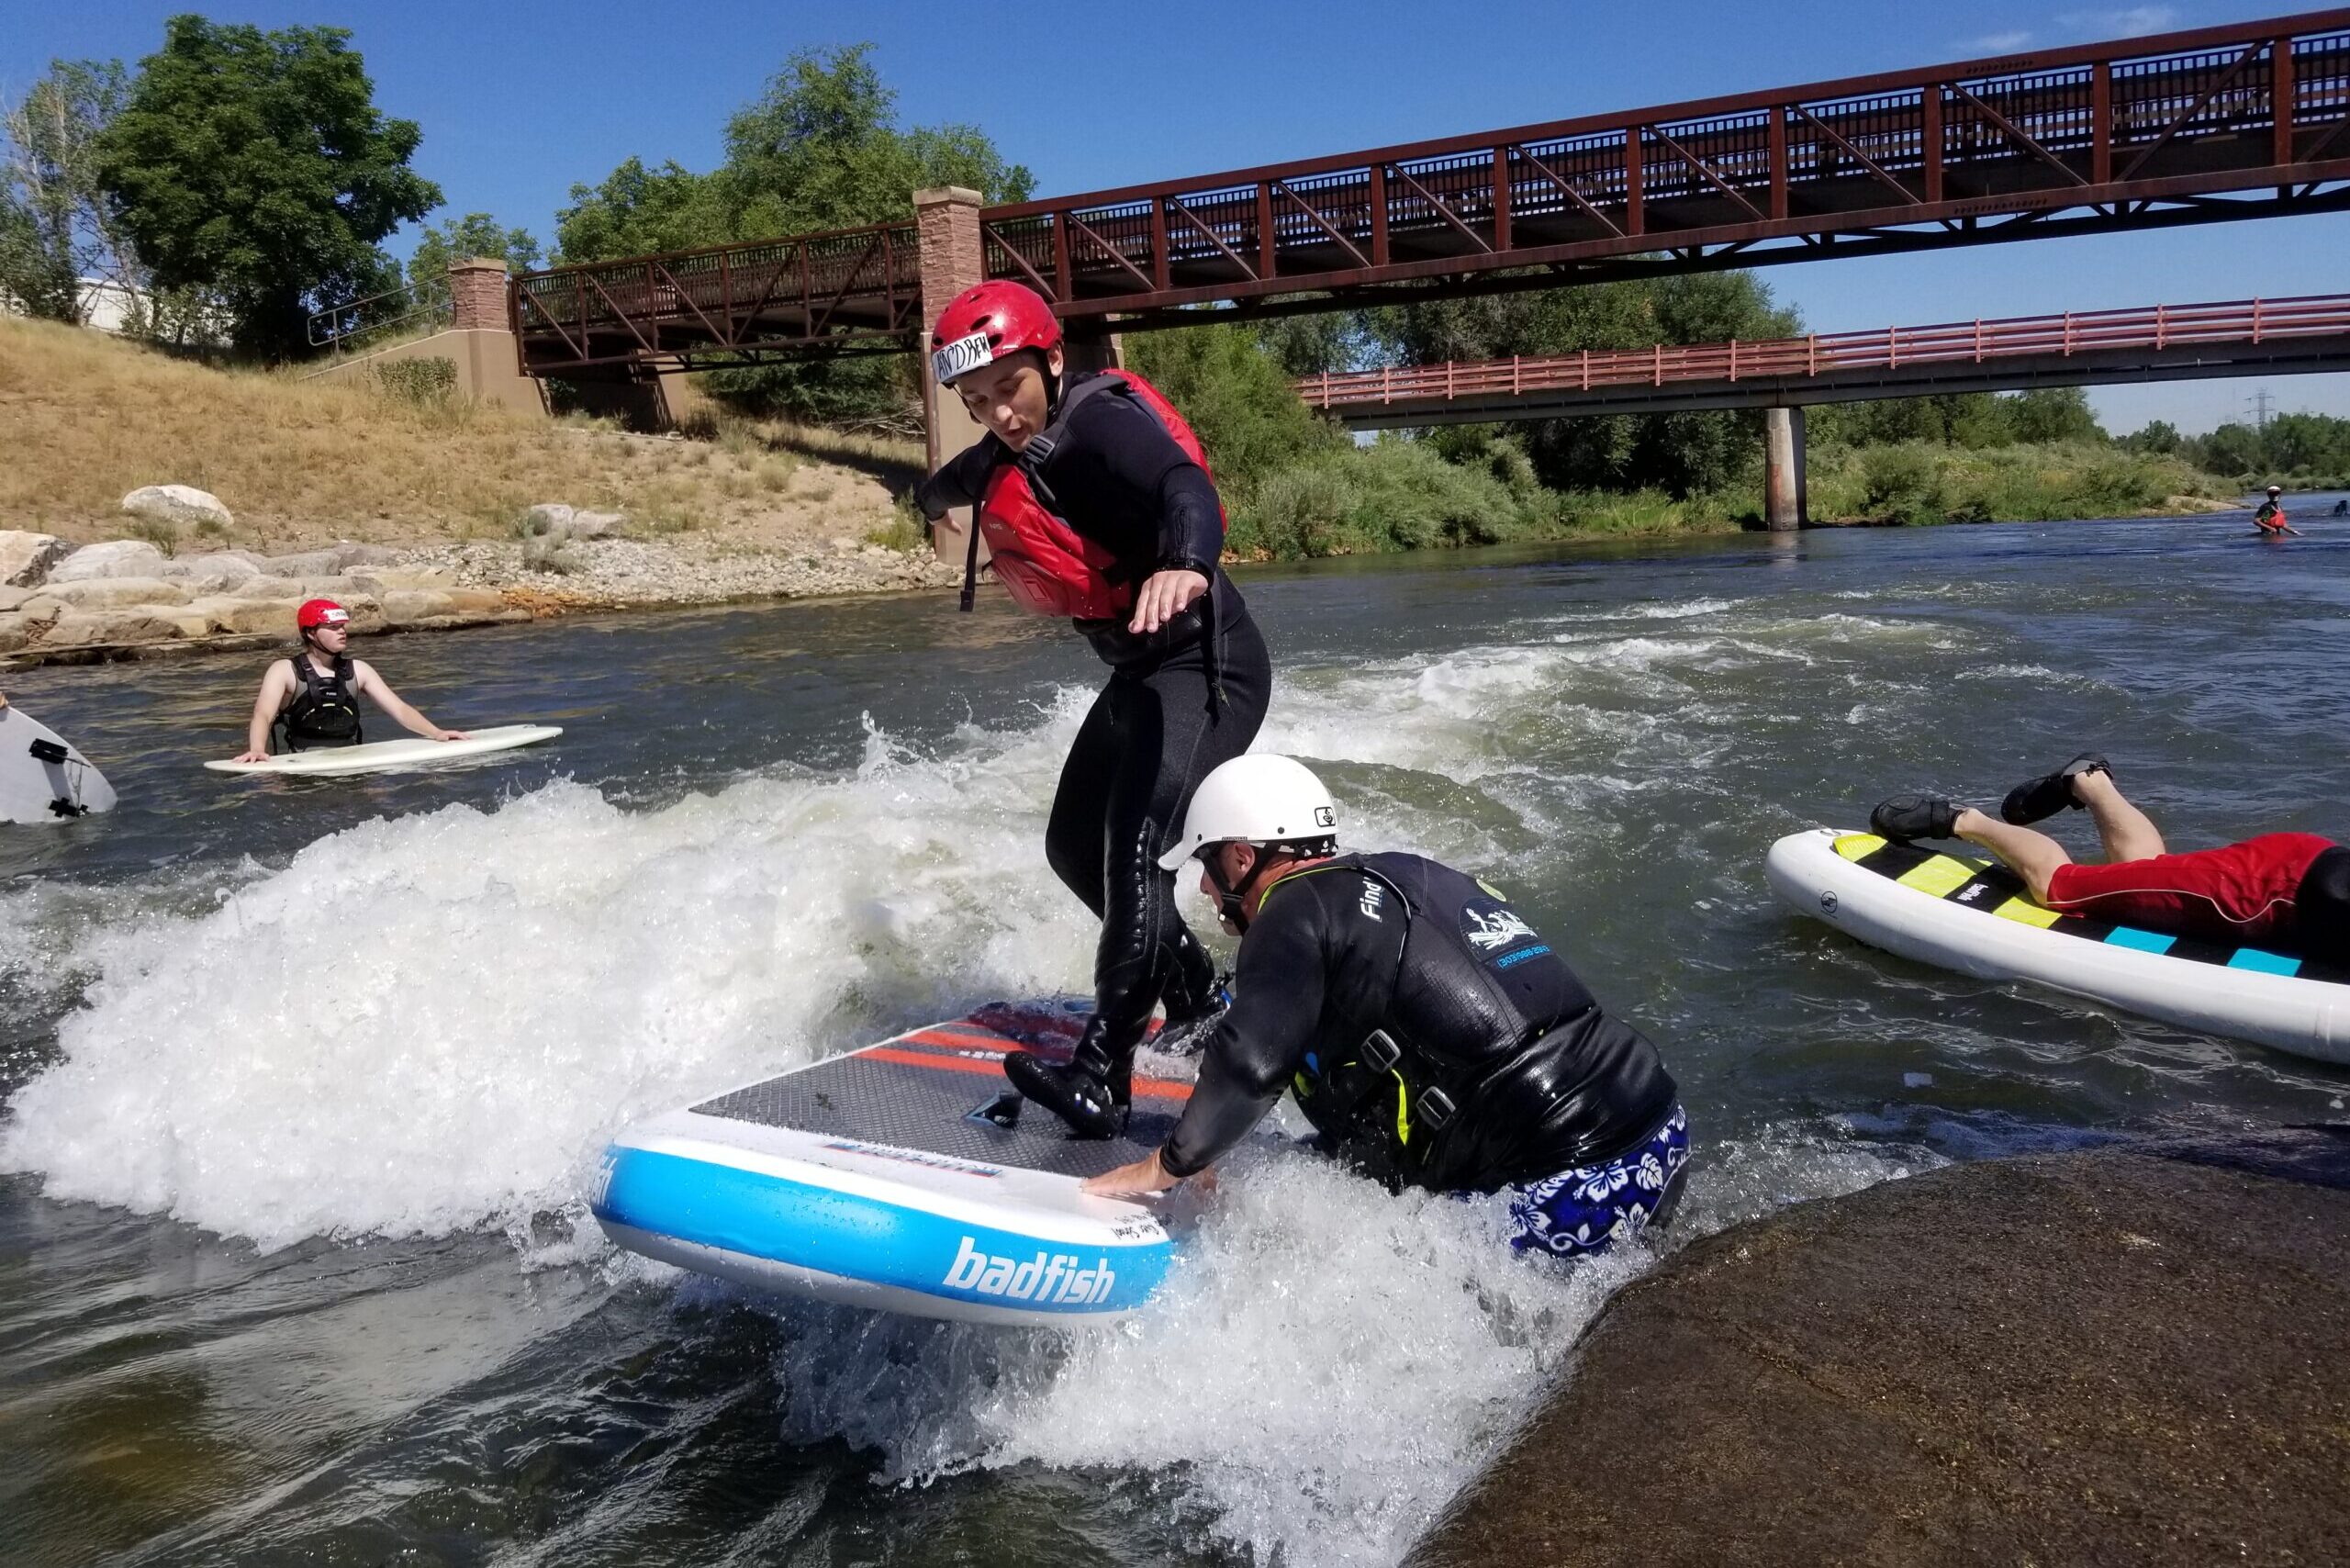 A Chill youth river surfing with an instructor helping.